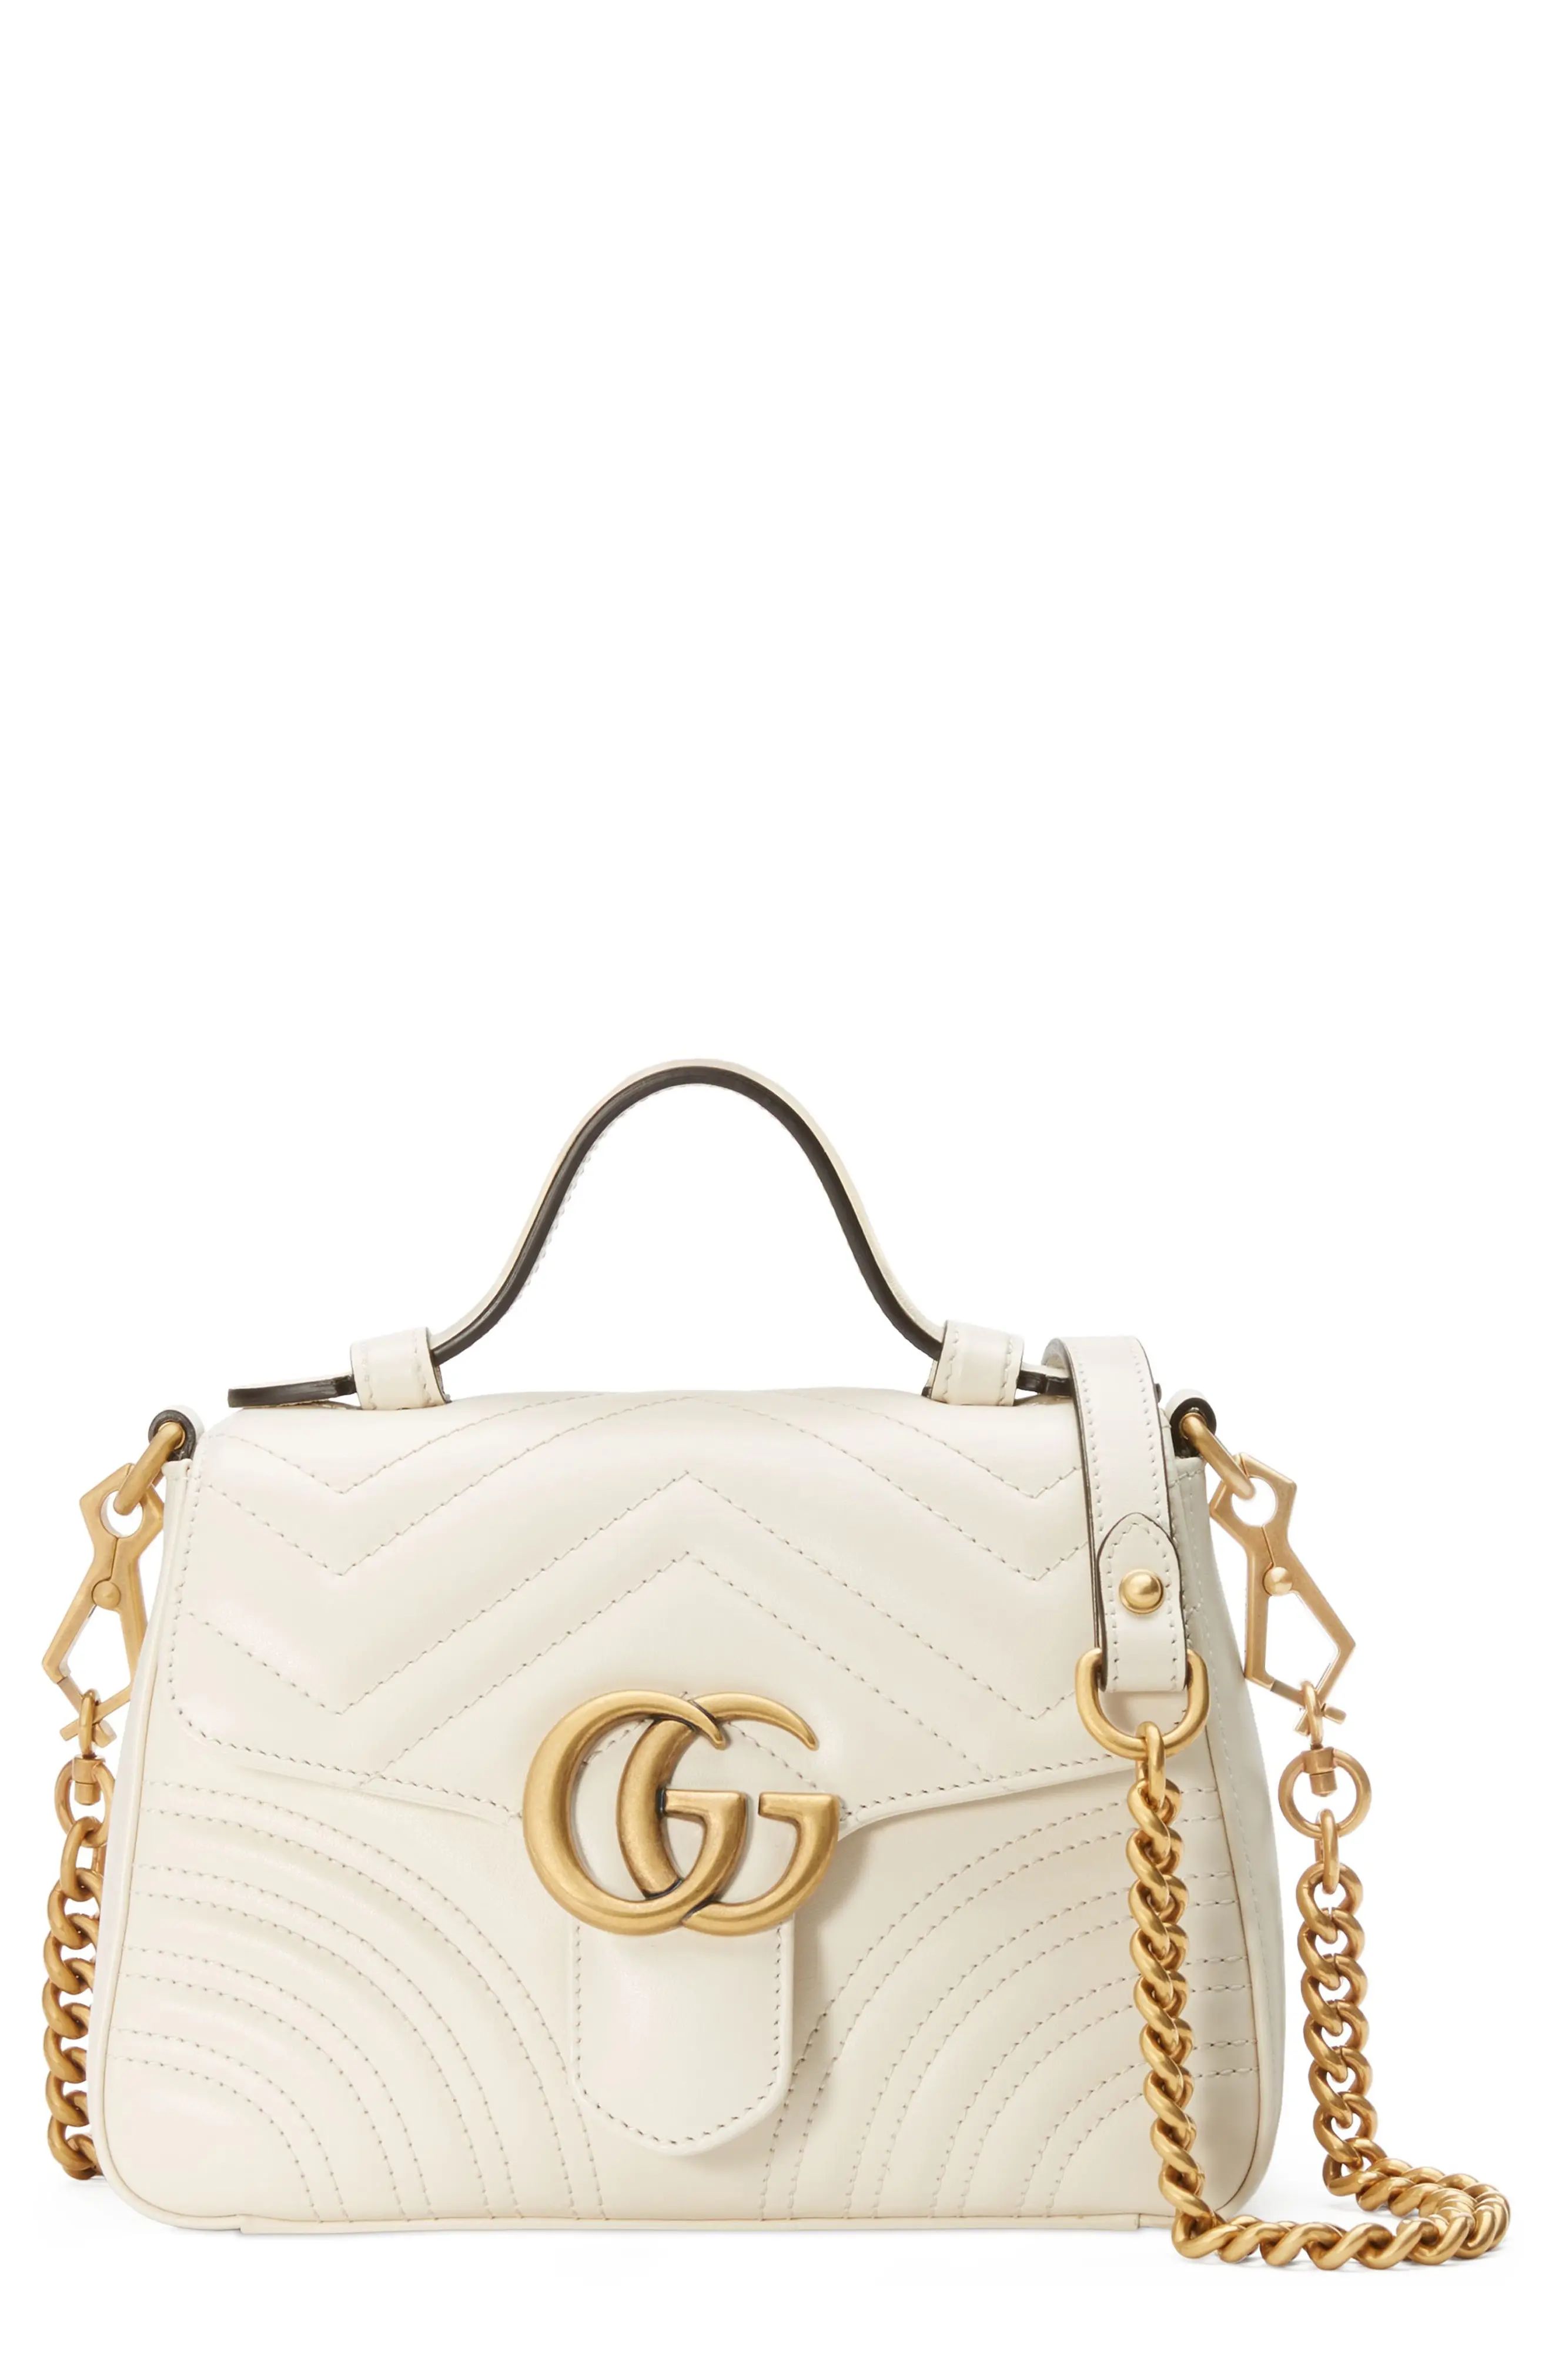 Gucci Leather Top Handle Bag - White | Nordstrom